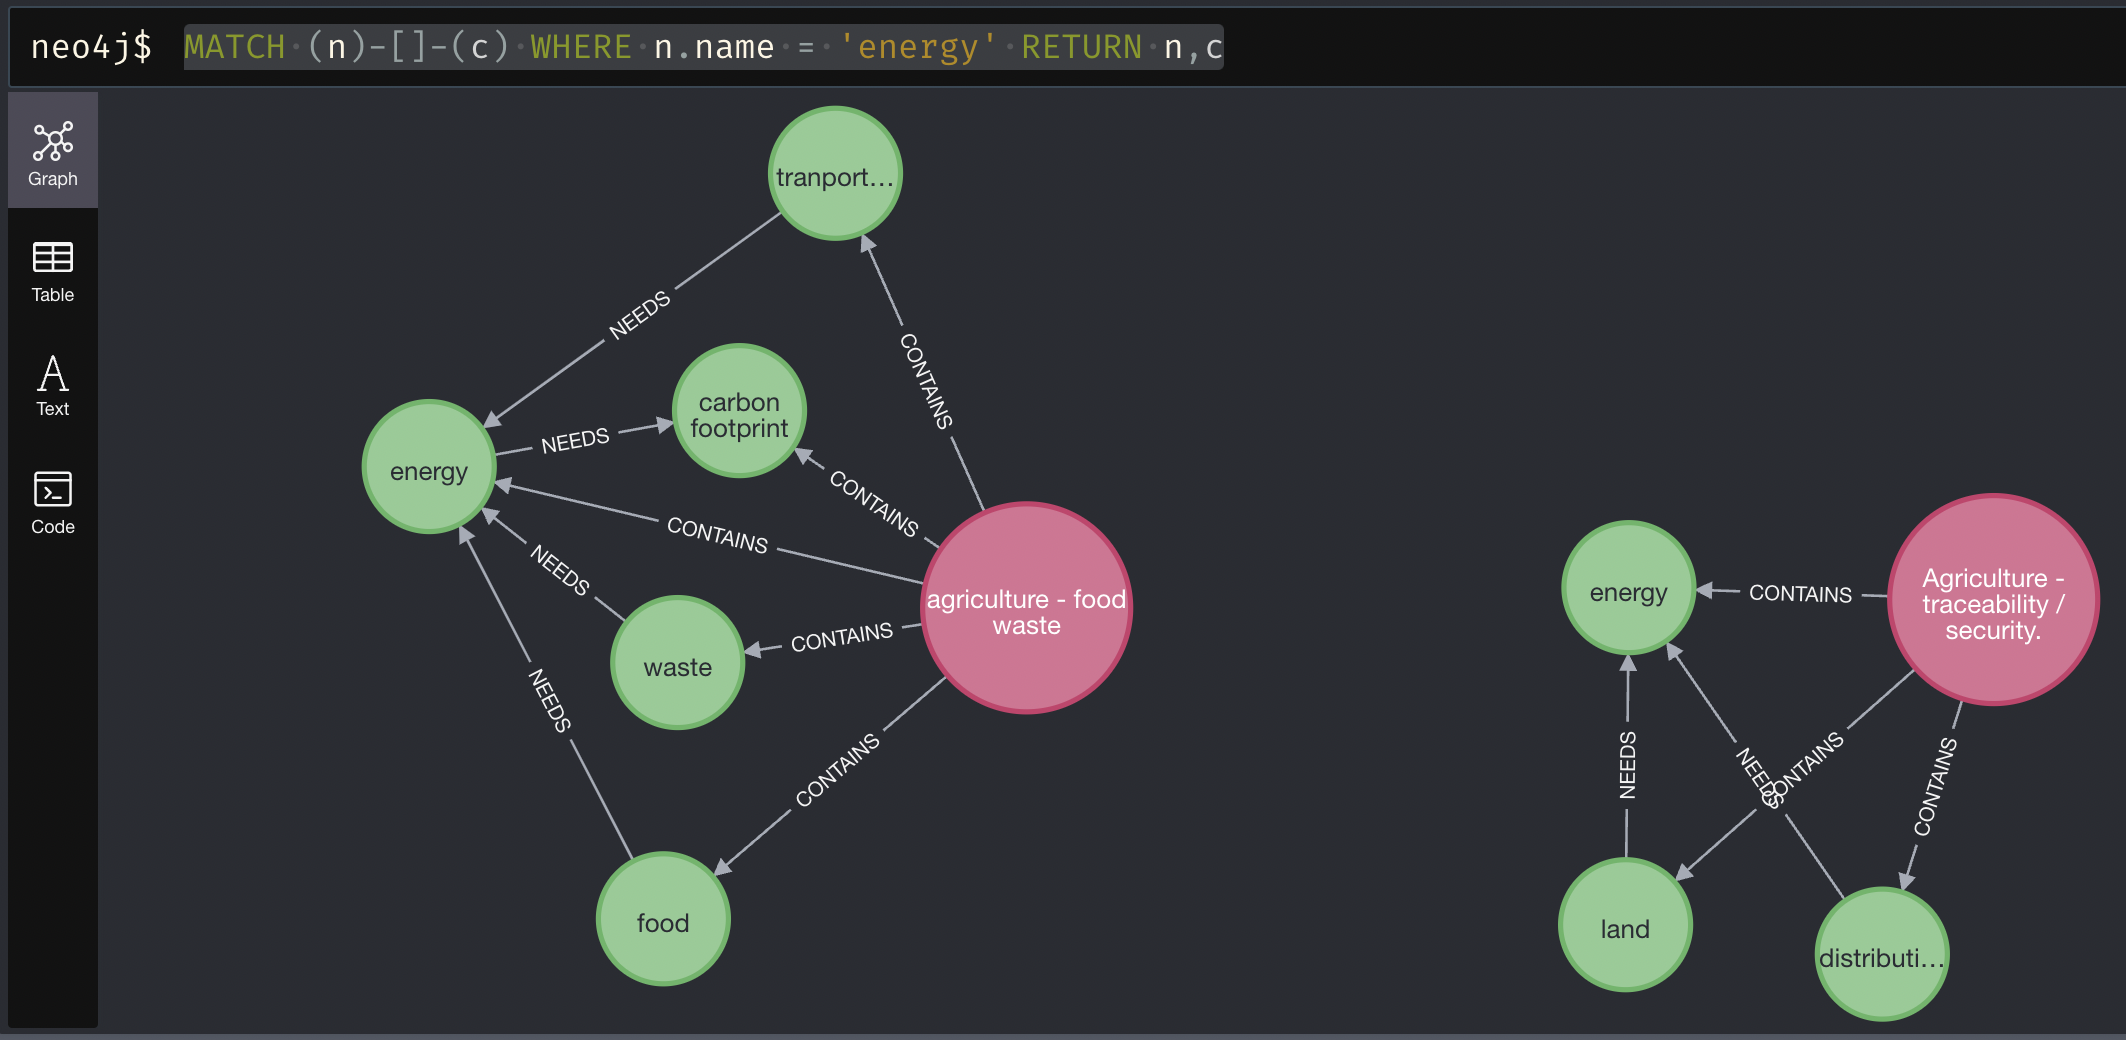 Further analysis of duplicates in the Neo4J browser